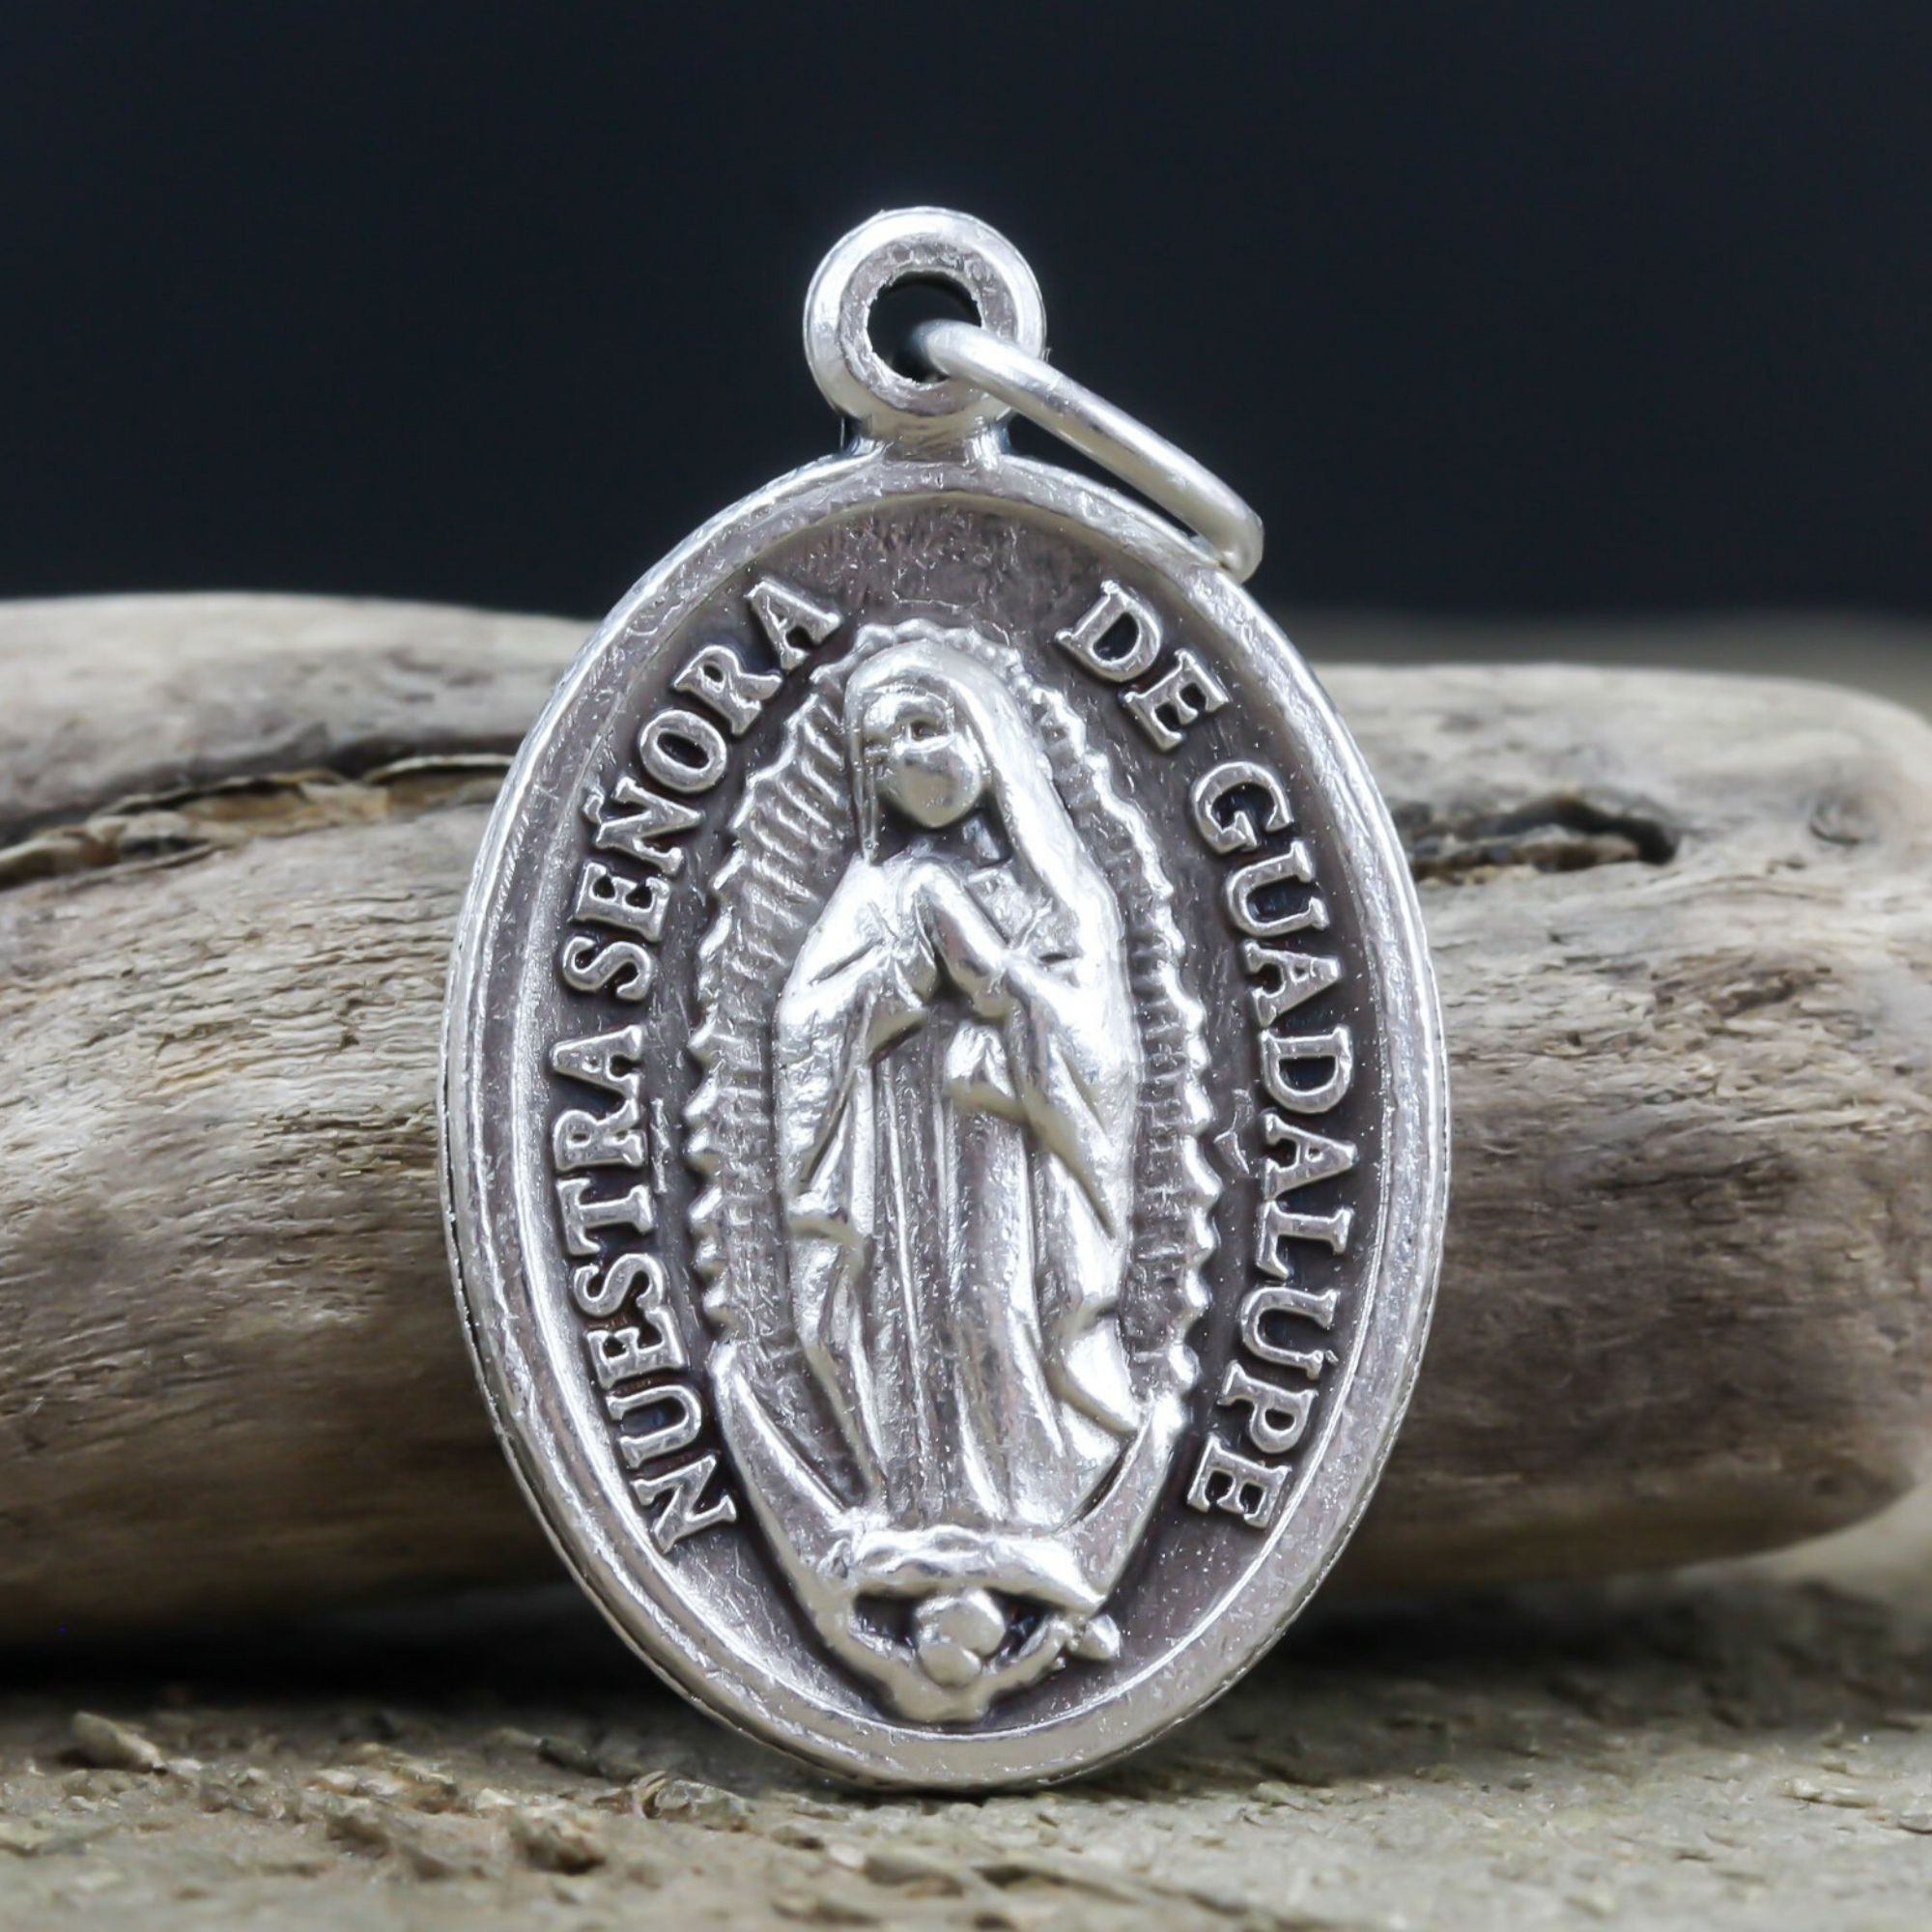 Our Lady of Guadalupe Infant of Atocha Spanish Medal